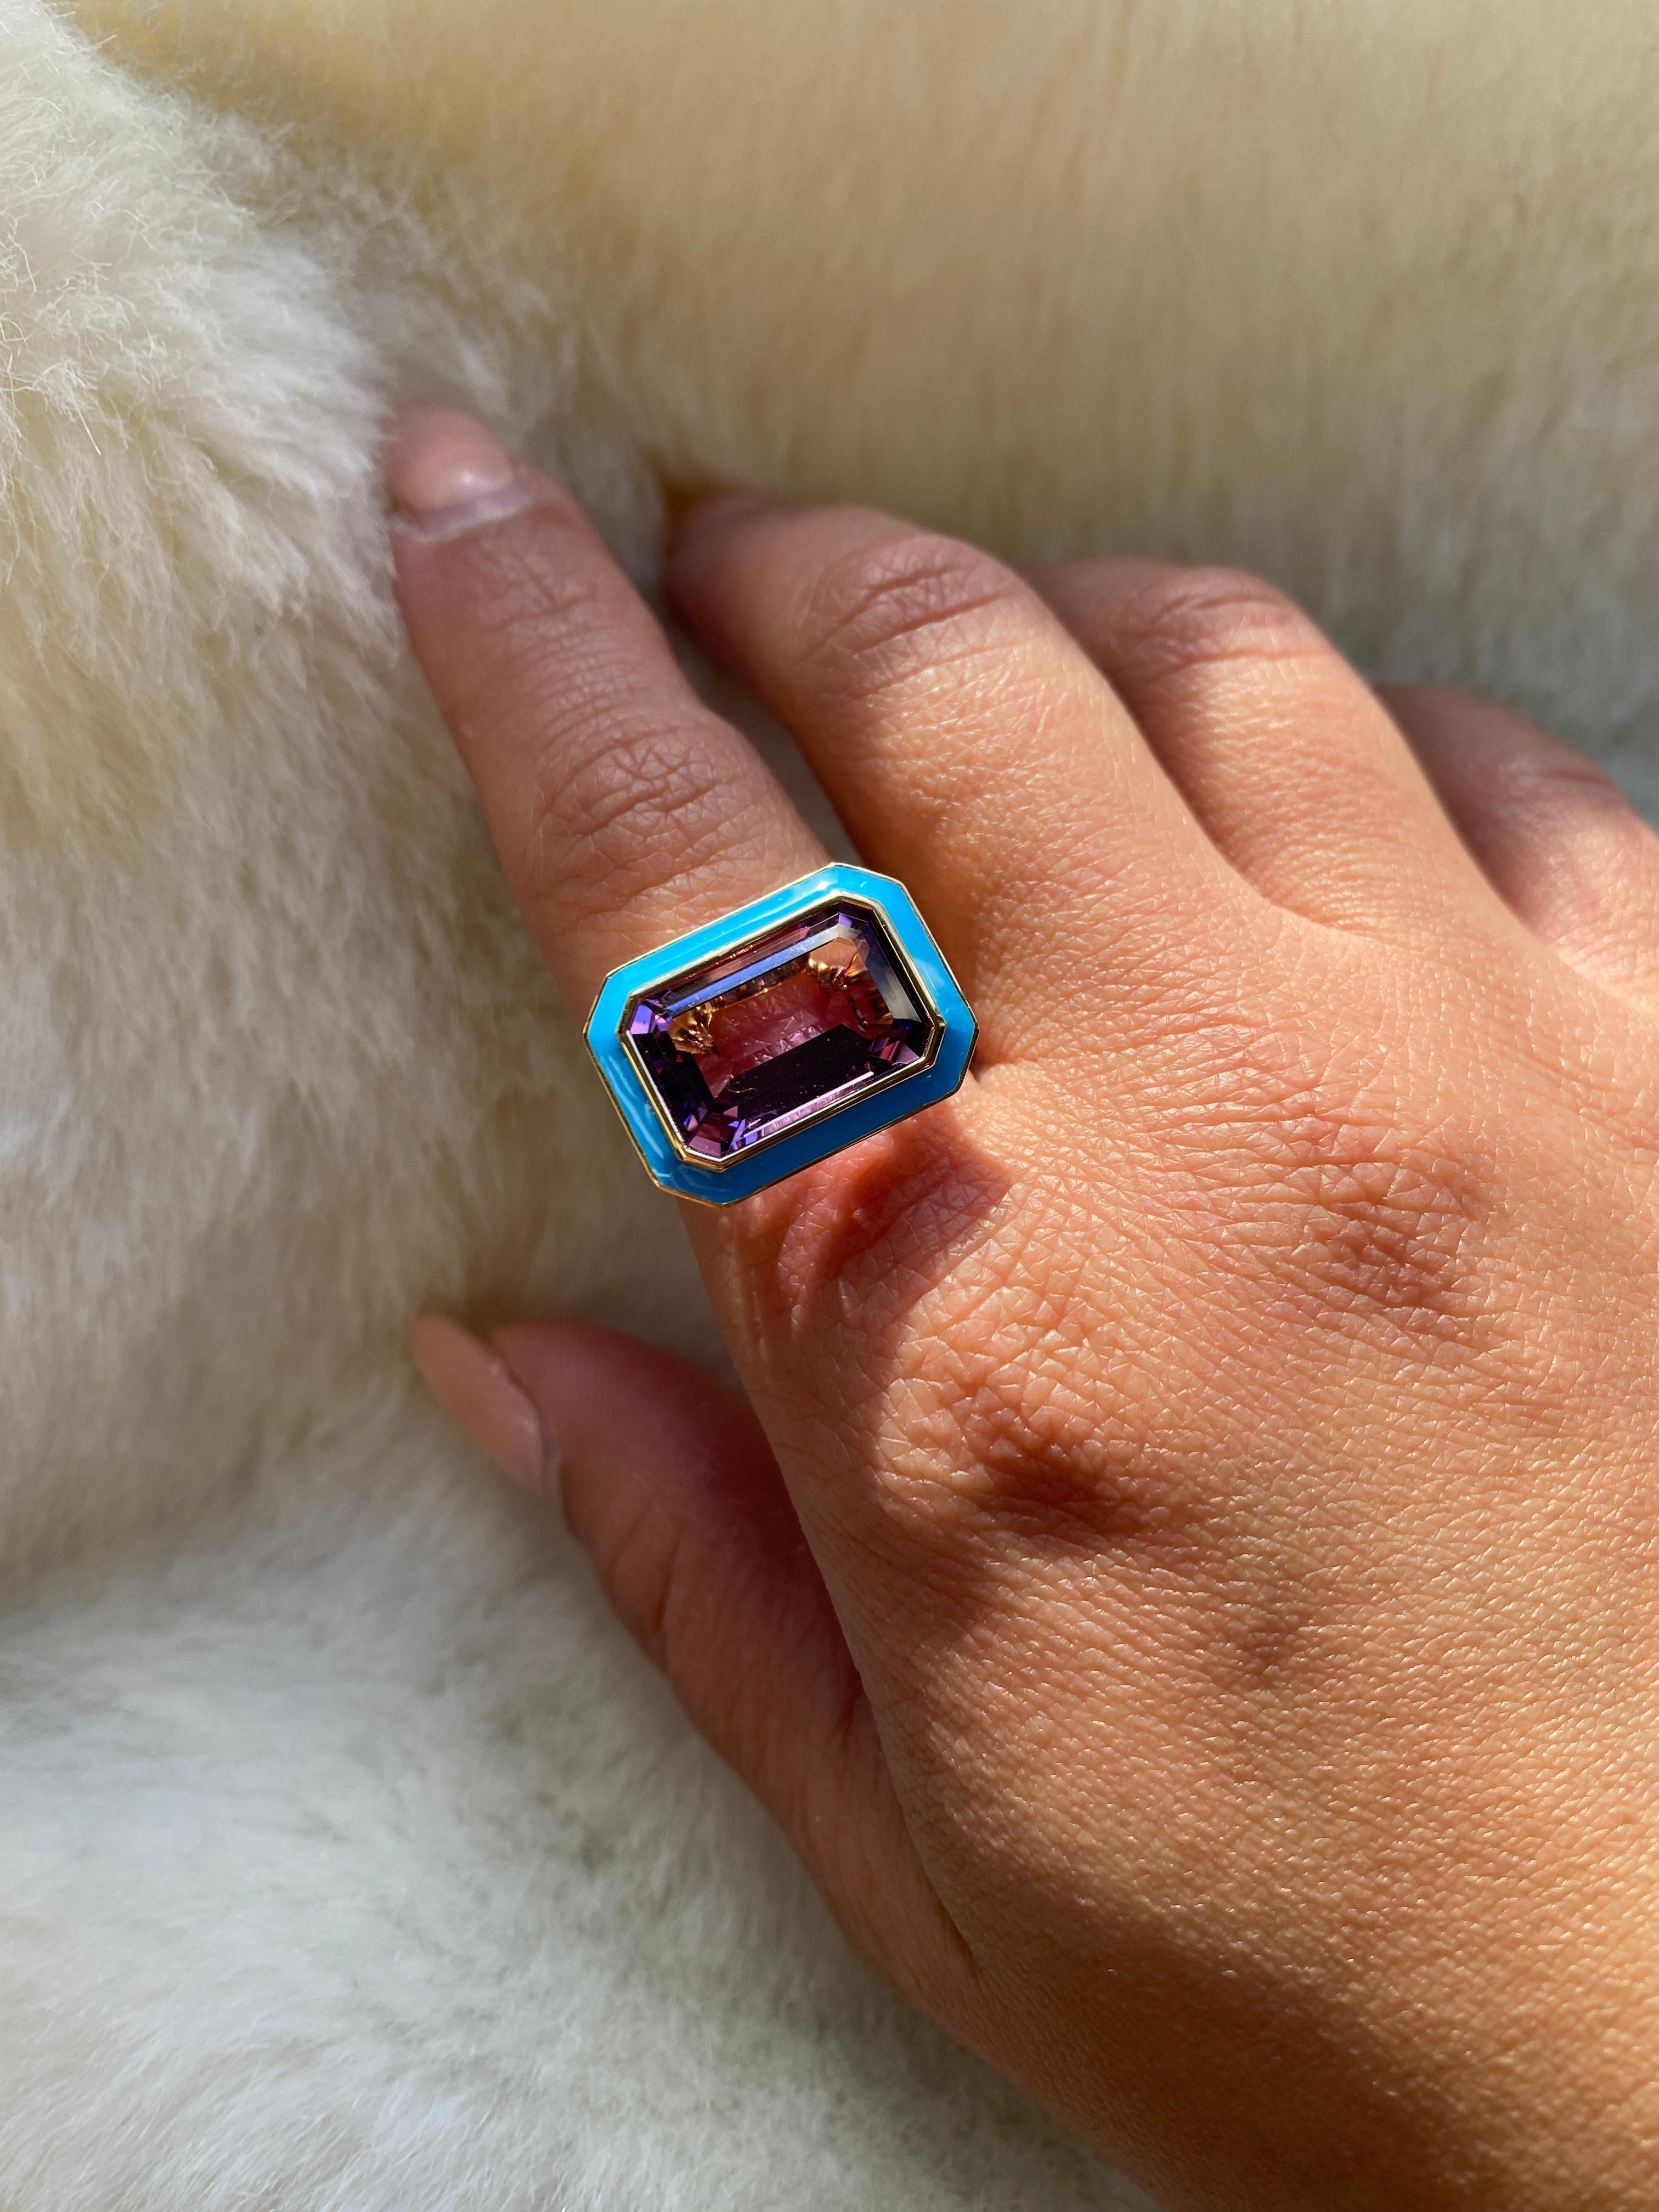 East-West Amethyst Ring with Turquoise Enamel in 18K Yellow Gold, from 'Queen' Collection. The combination of enamel and Amethyst represents power, richness and passion of a true Queen. The feeling of luxury is what we’re aiming for. This will be